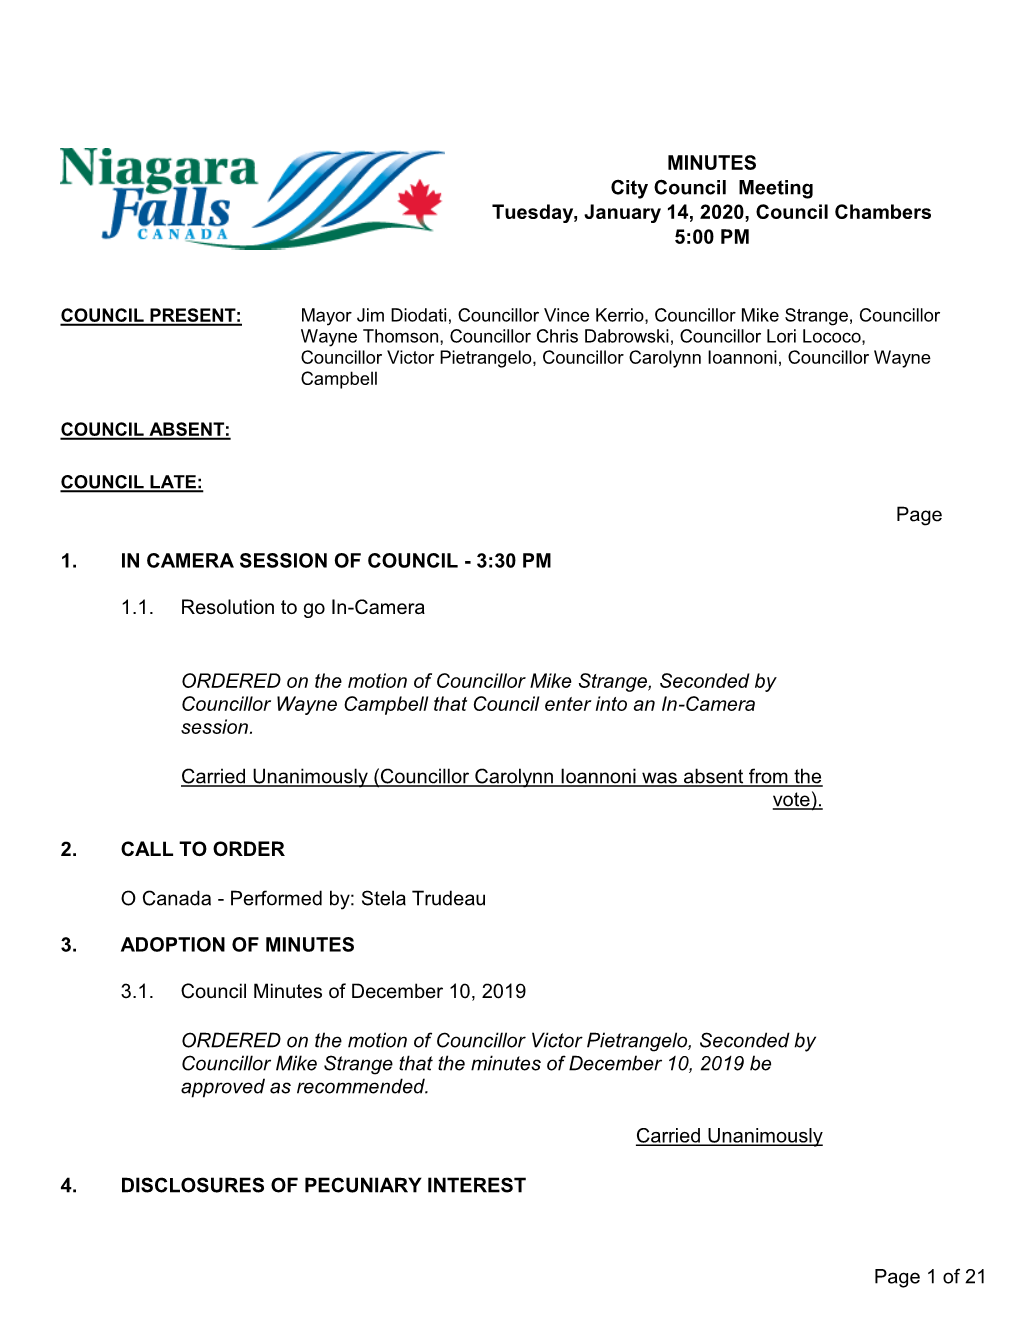 City Council Meeting Tuesday, January 14, 2020, Council Chambers 5:00 PM